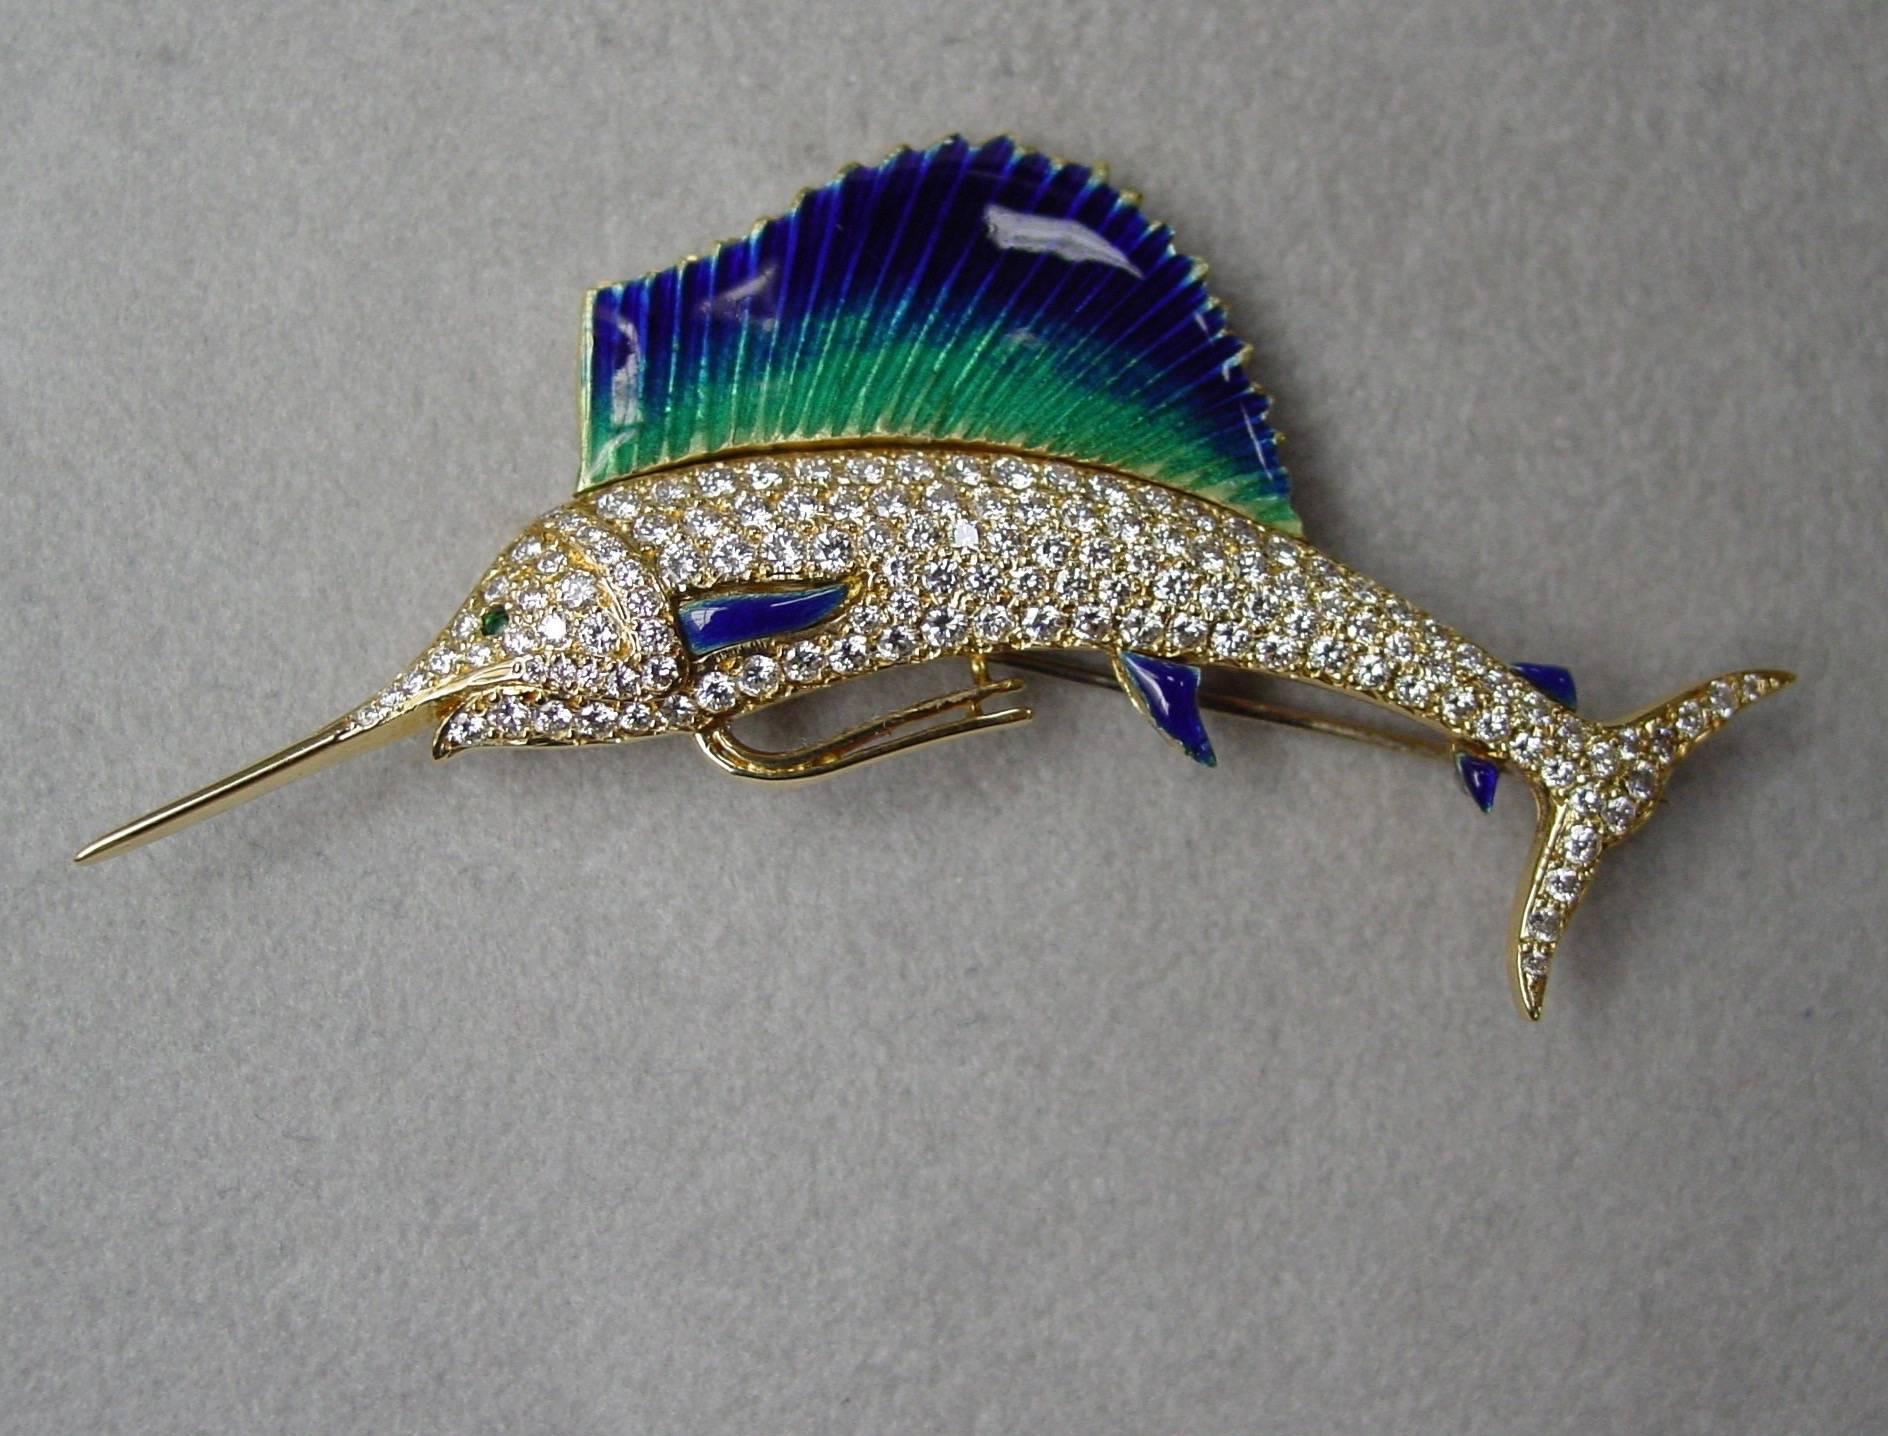 An 18 karat yellow gold diamond and enamel sailfish brooch. This wonderful sailfish features a diamond pavé body weighing approximately two carats,  beautifully enameled fins and an emerald eye. With plaque on reverse engraved "Shammy 5/92